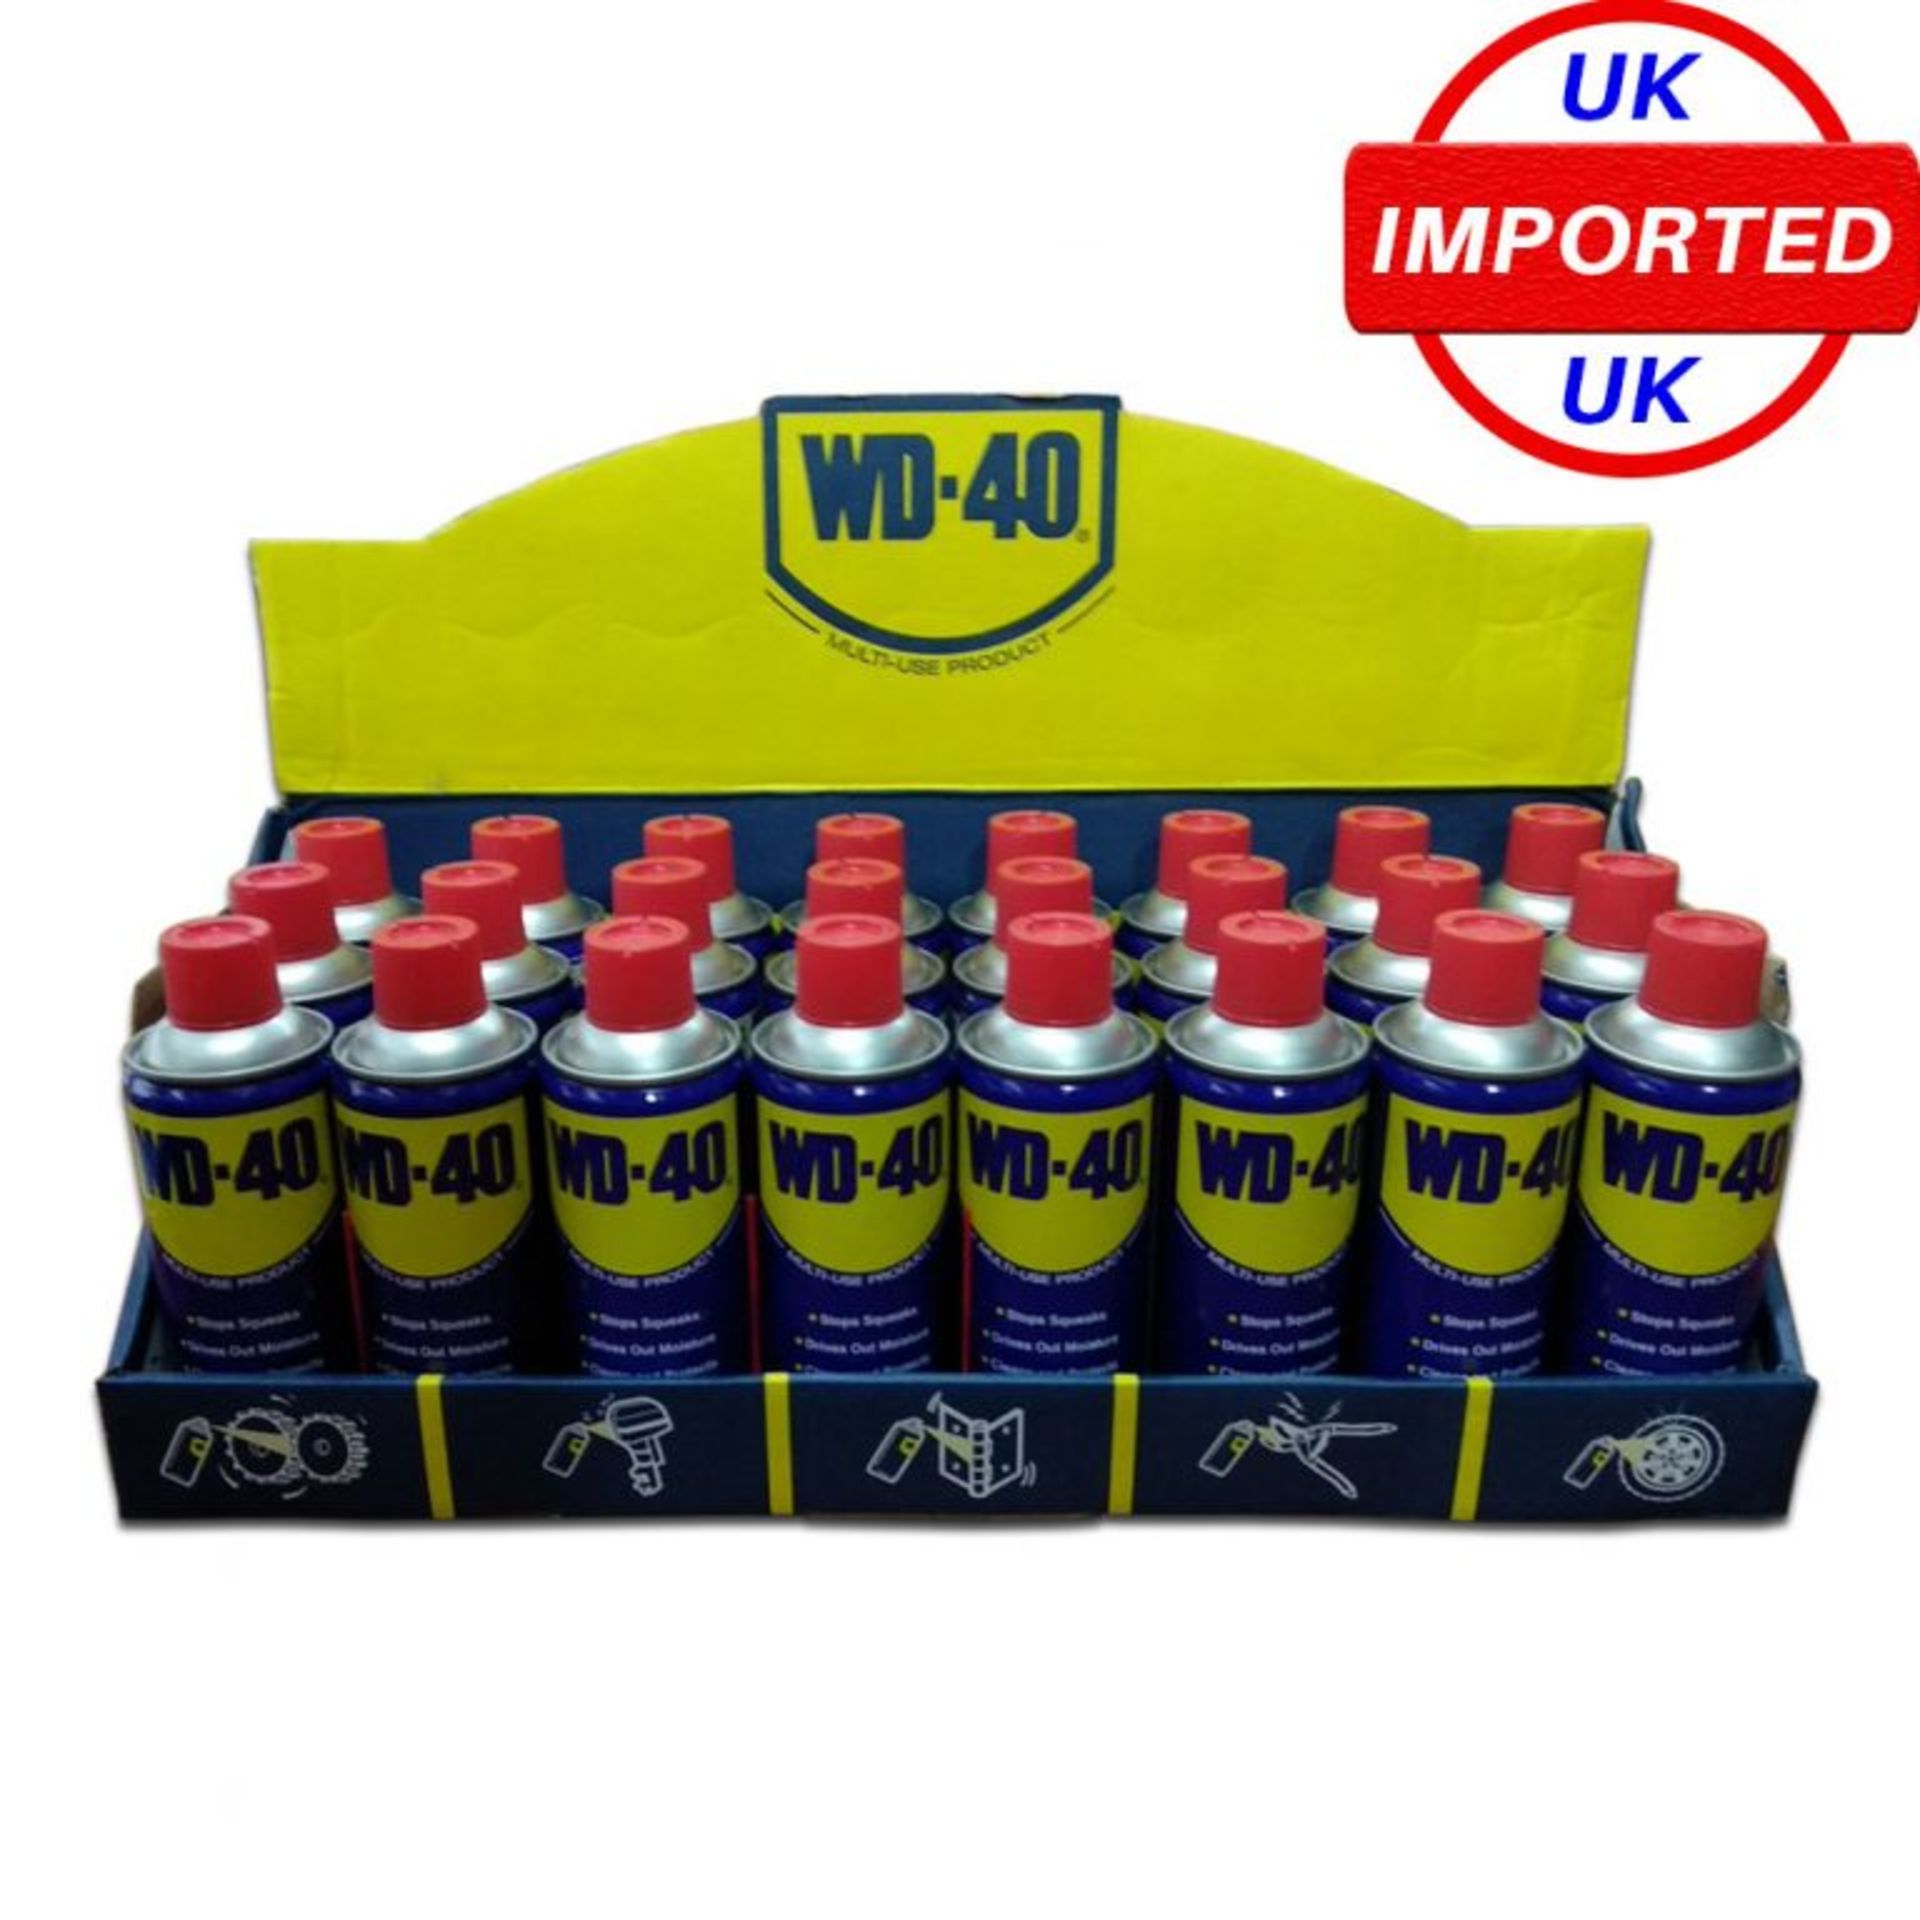 24x cans WD40 in retail display case - 330ml size new and sealed